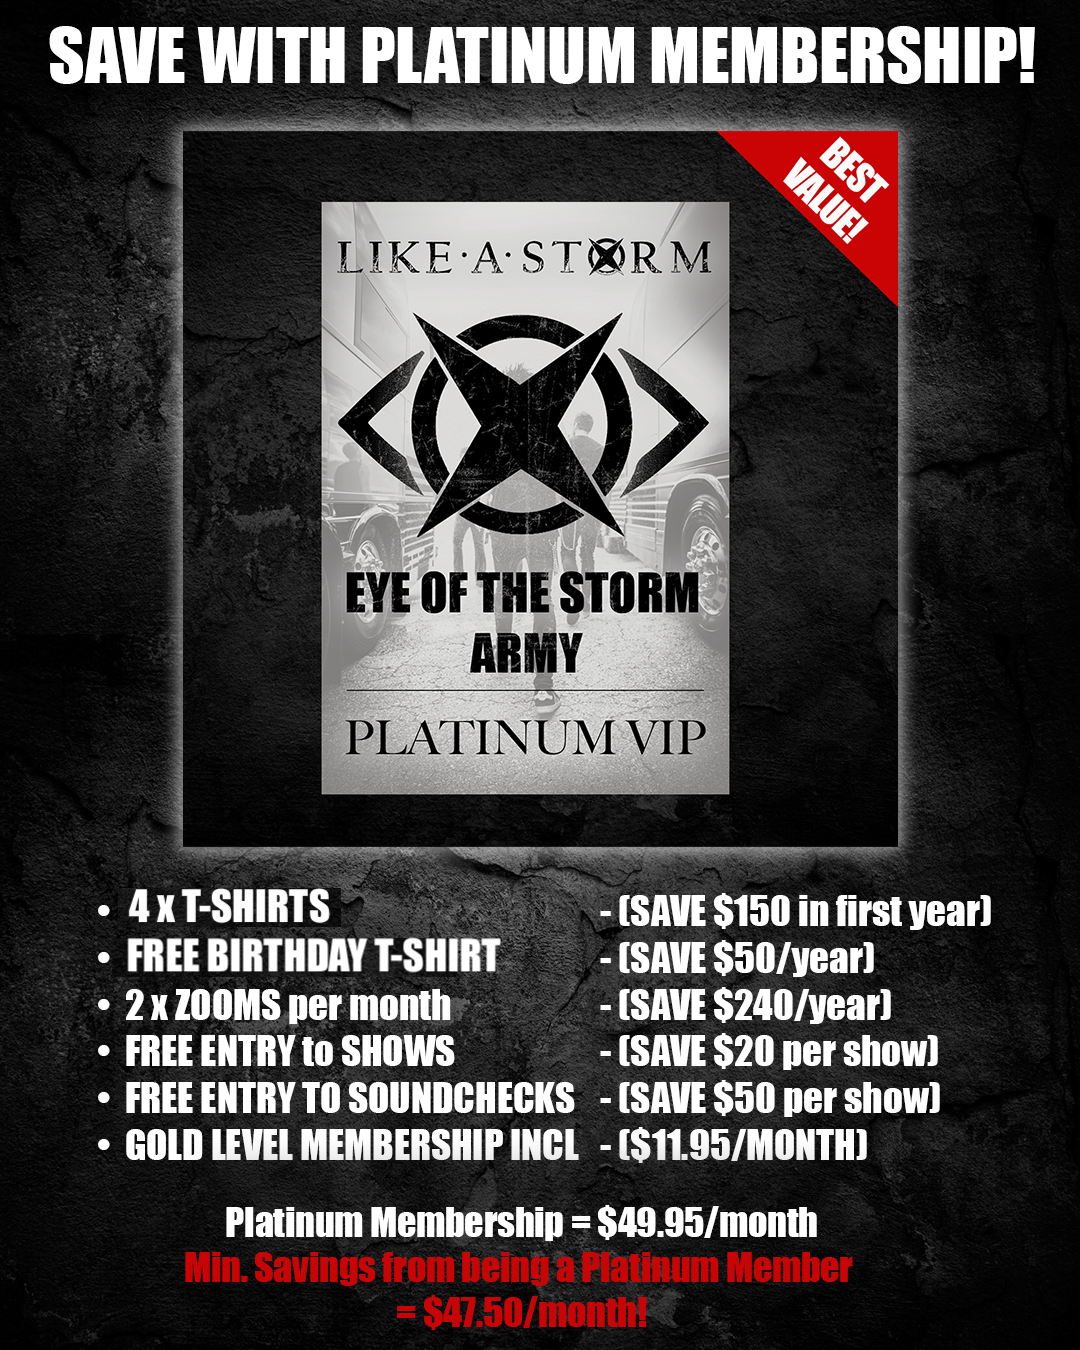 Eye Of The Storm - PLATINUM Membership (Annual Plan) - Get One Month FREE!